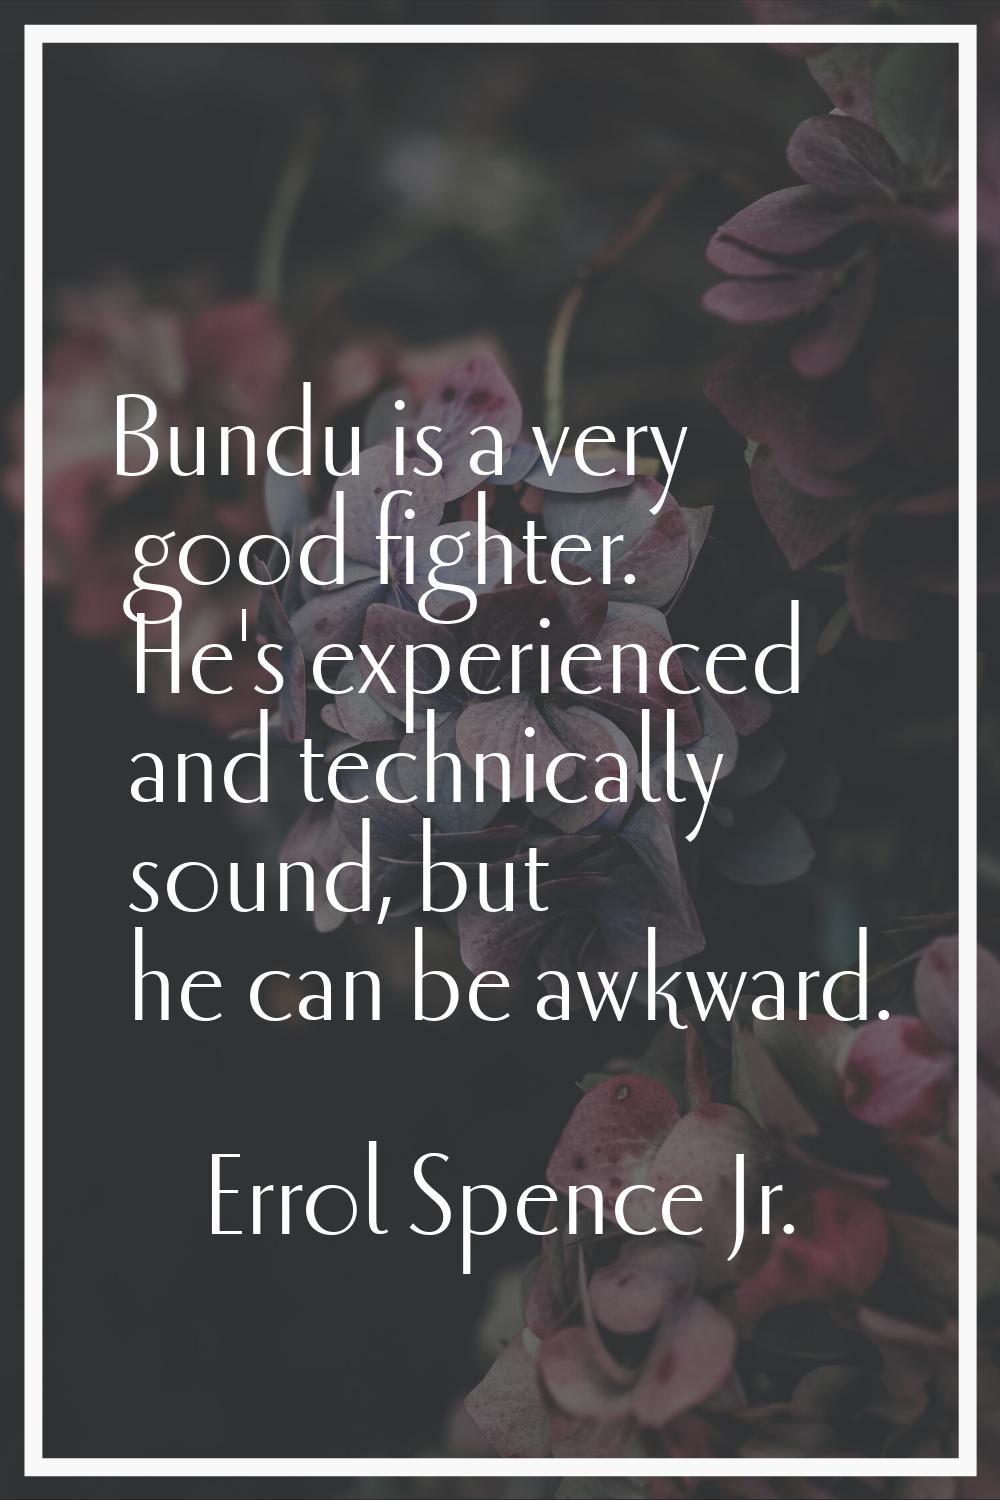 Bundu is a very good fighter. He's experienced and technically sound, but he can be awkward.